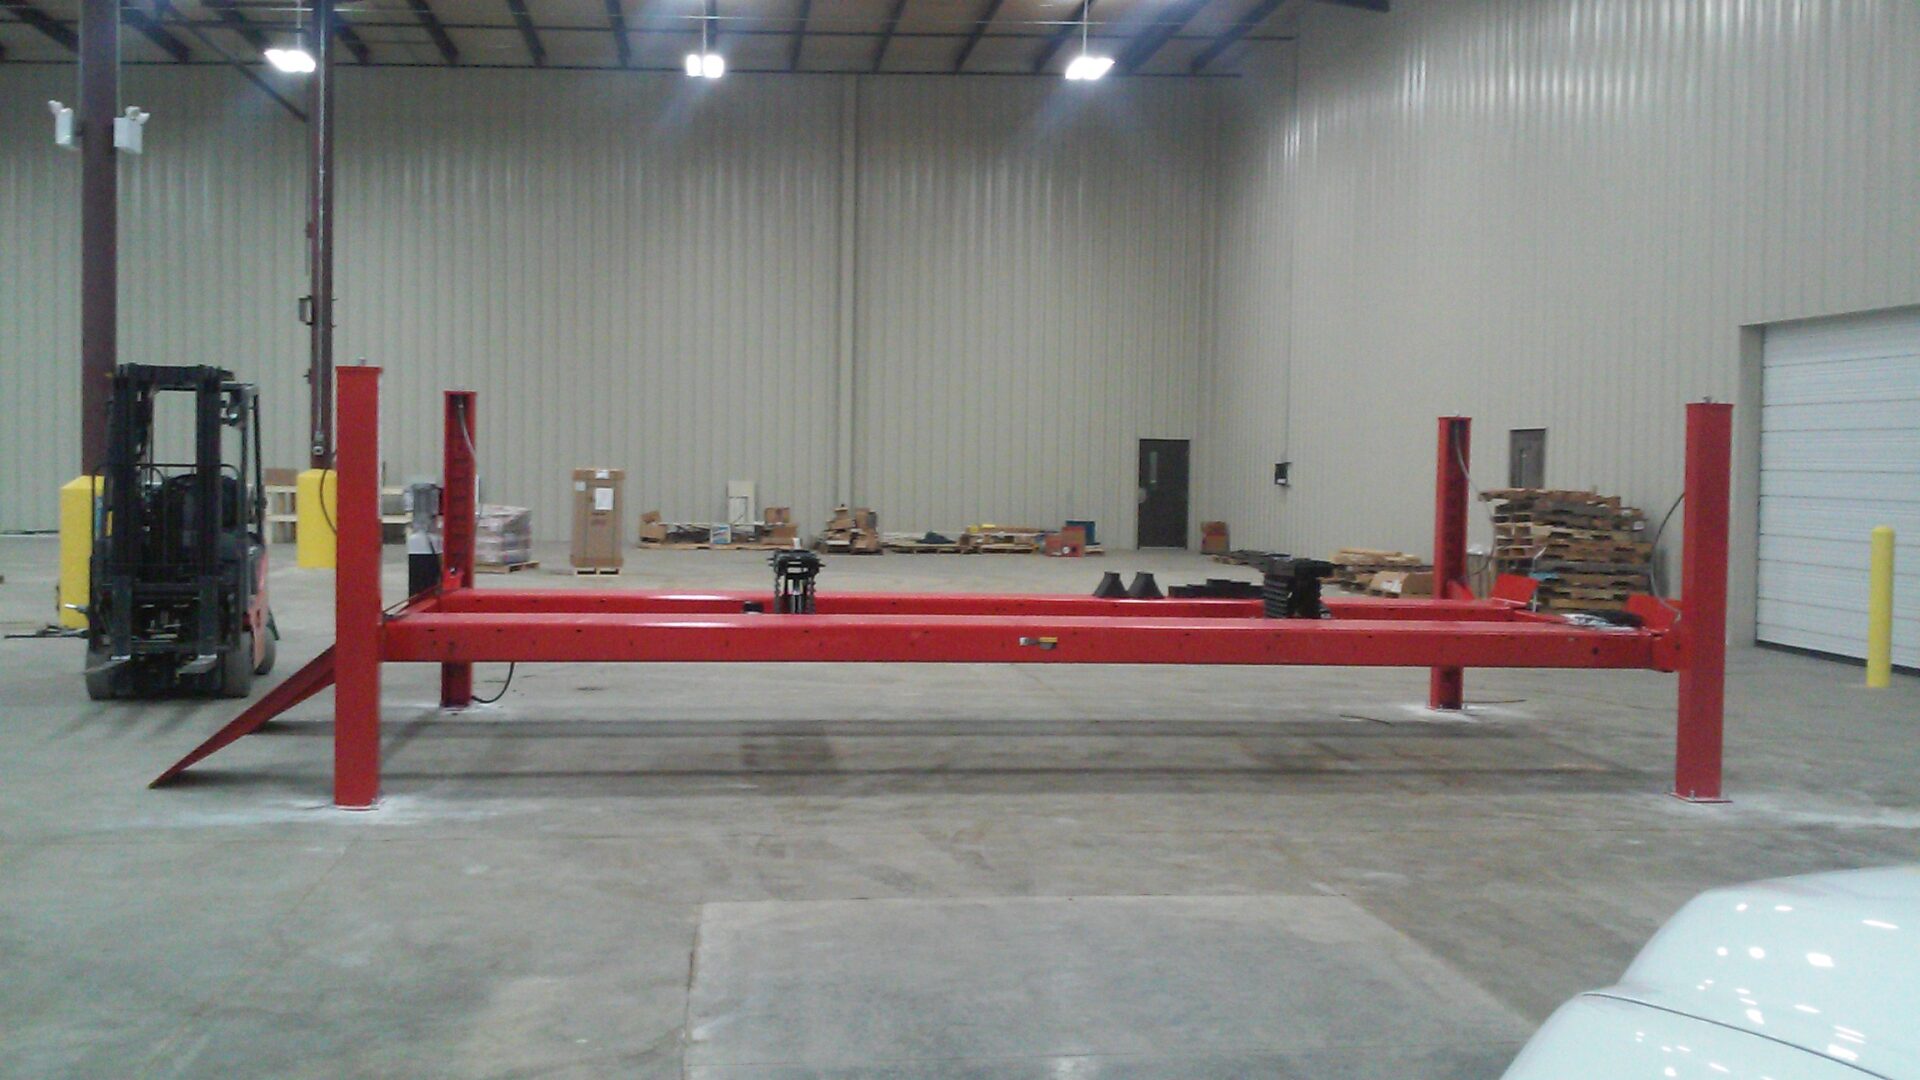 A red metal structure in an empty warehouse.